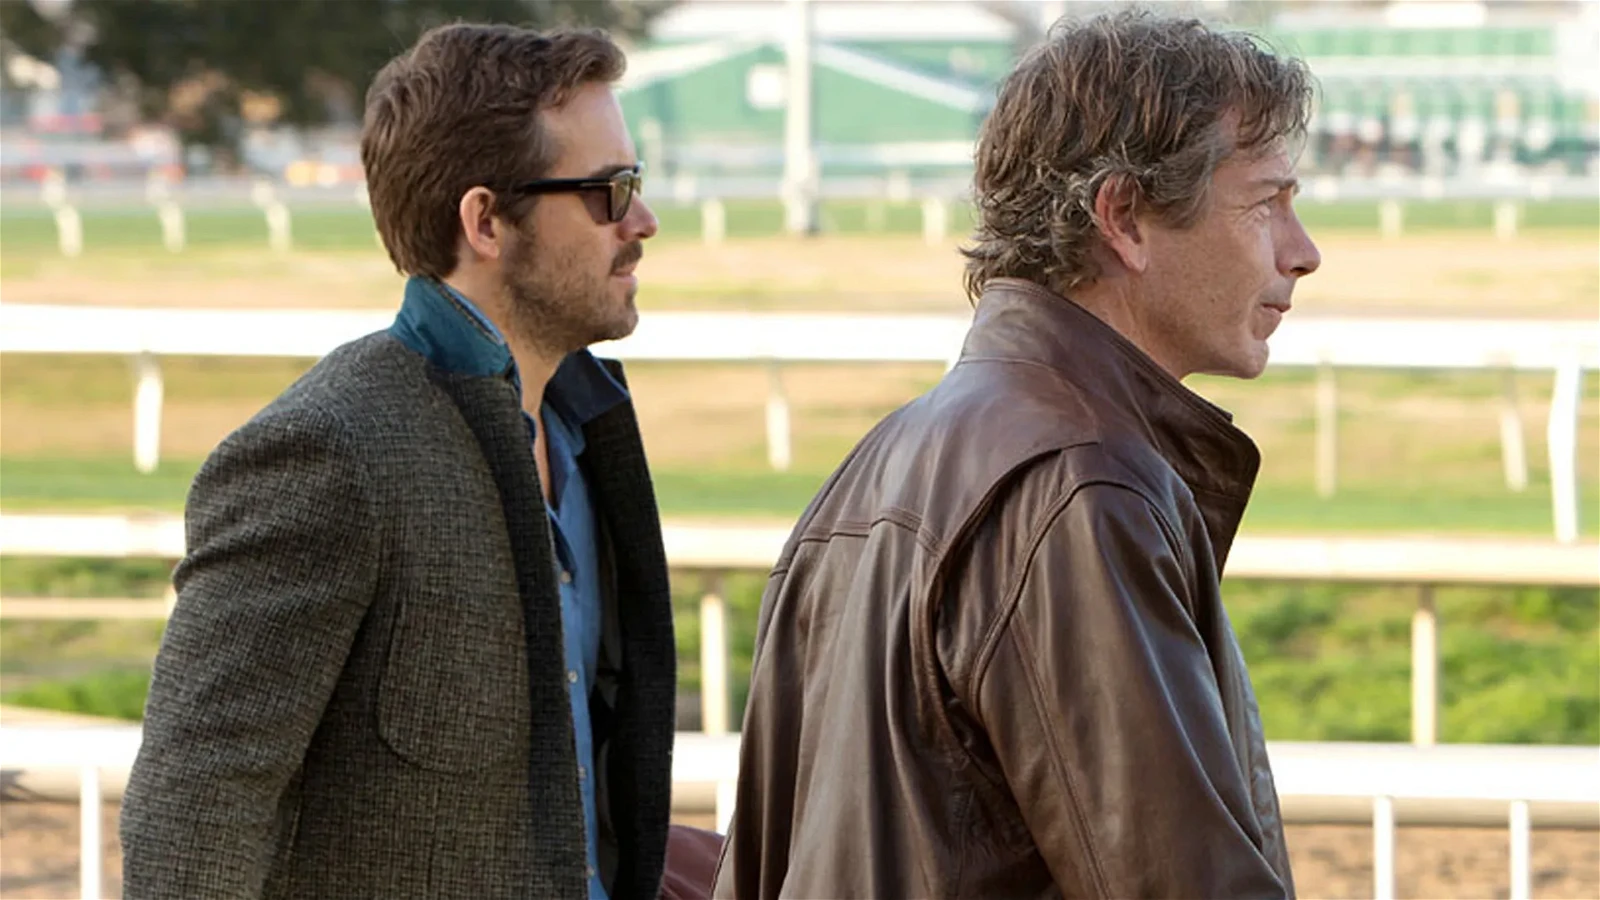 A still from Mississippi Grind